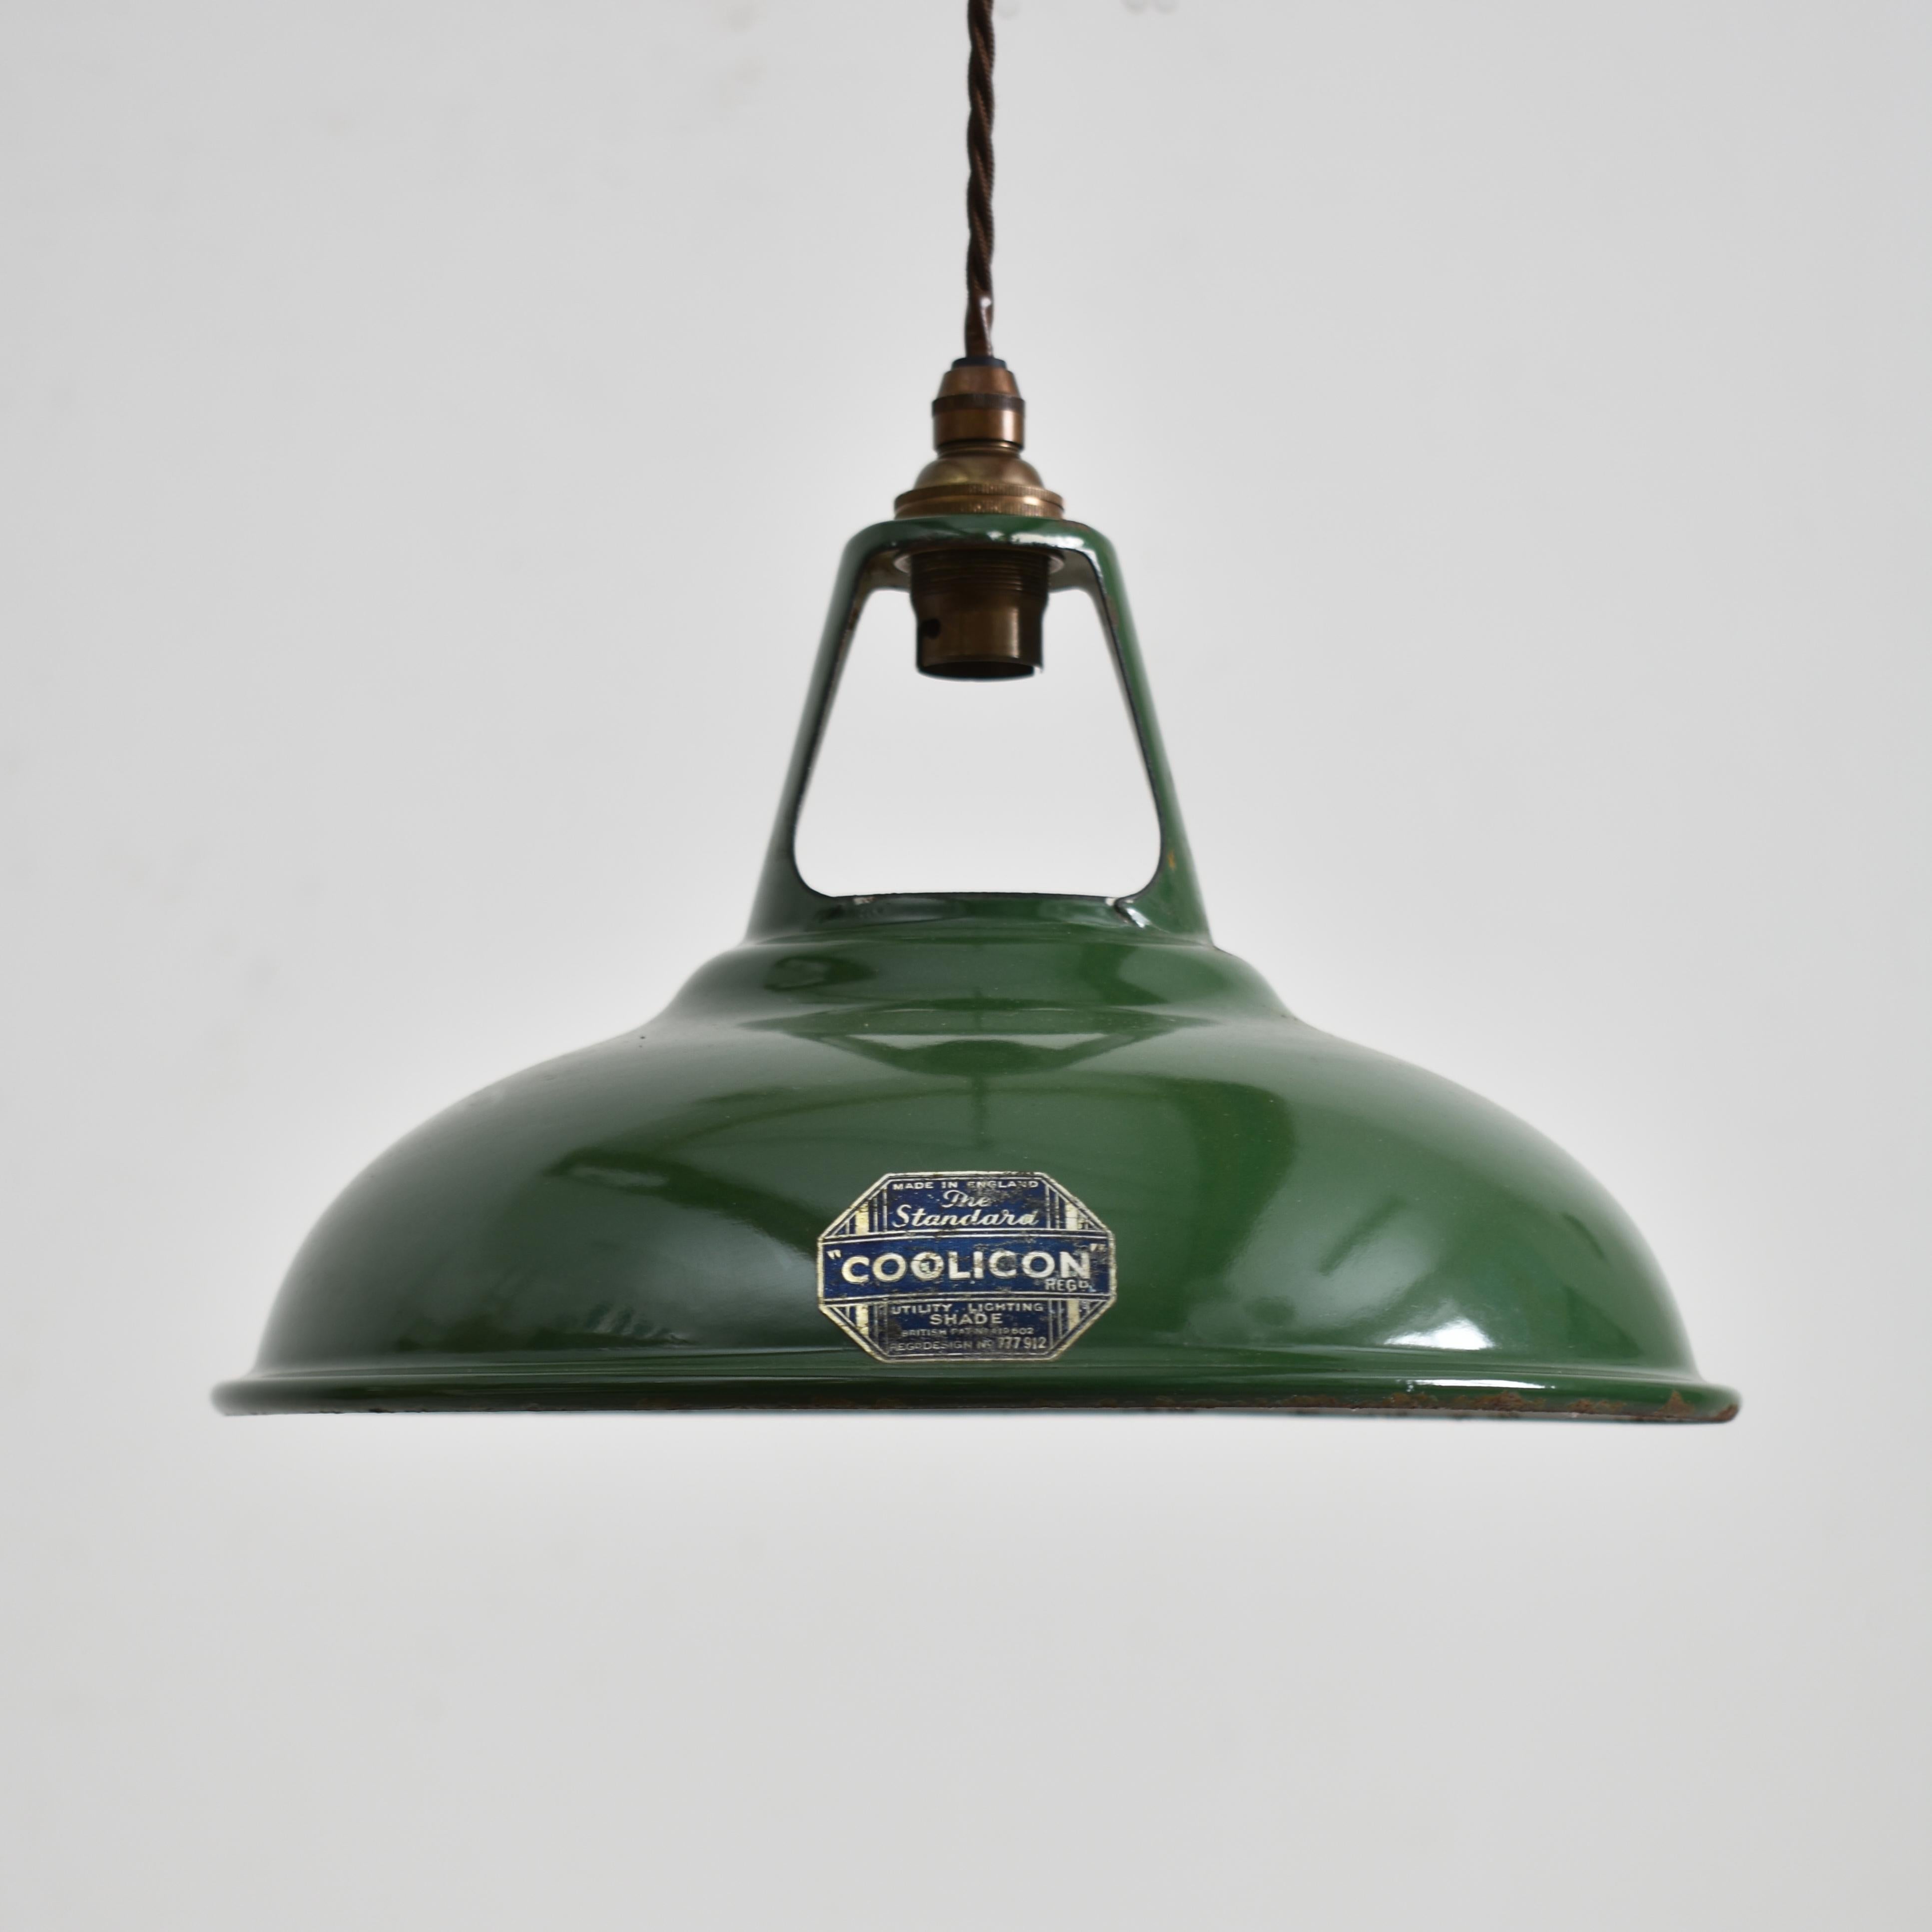 Original Antique 9″ Green Coolicon Light -B

Early English factory shades by ‘Coolicon’ salvaged from an old factory storeroom where they have been sat untouched for the past 70 years. The shades are green in colour all in excellent condition with